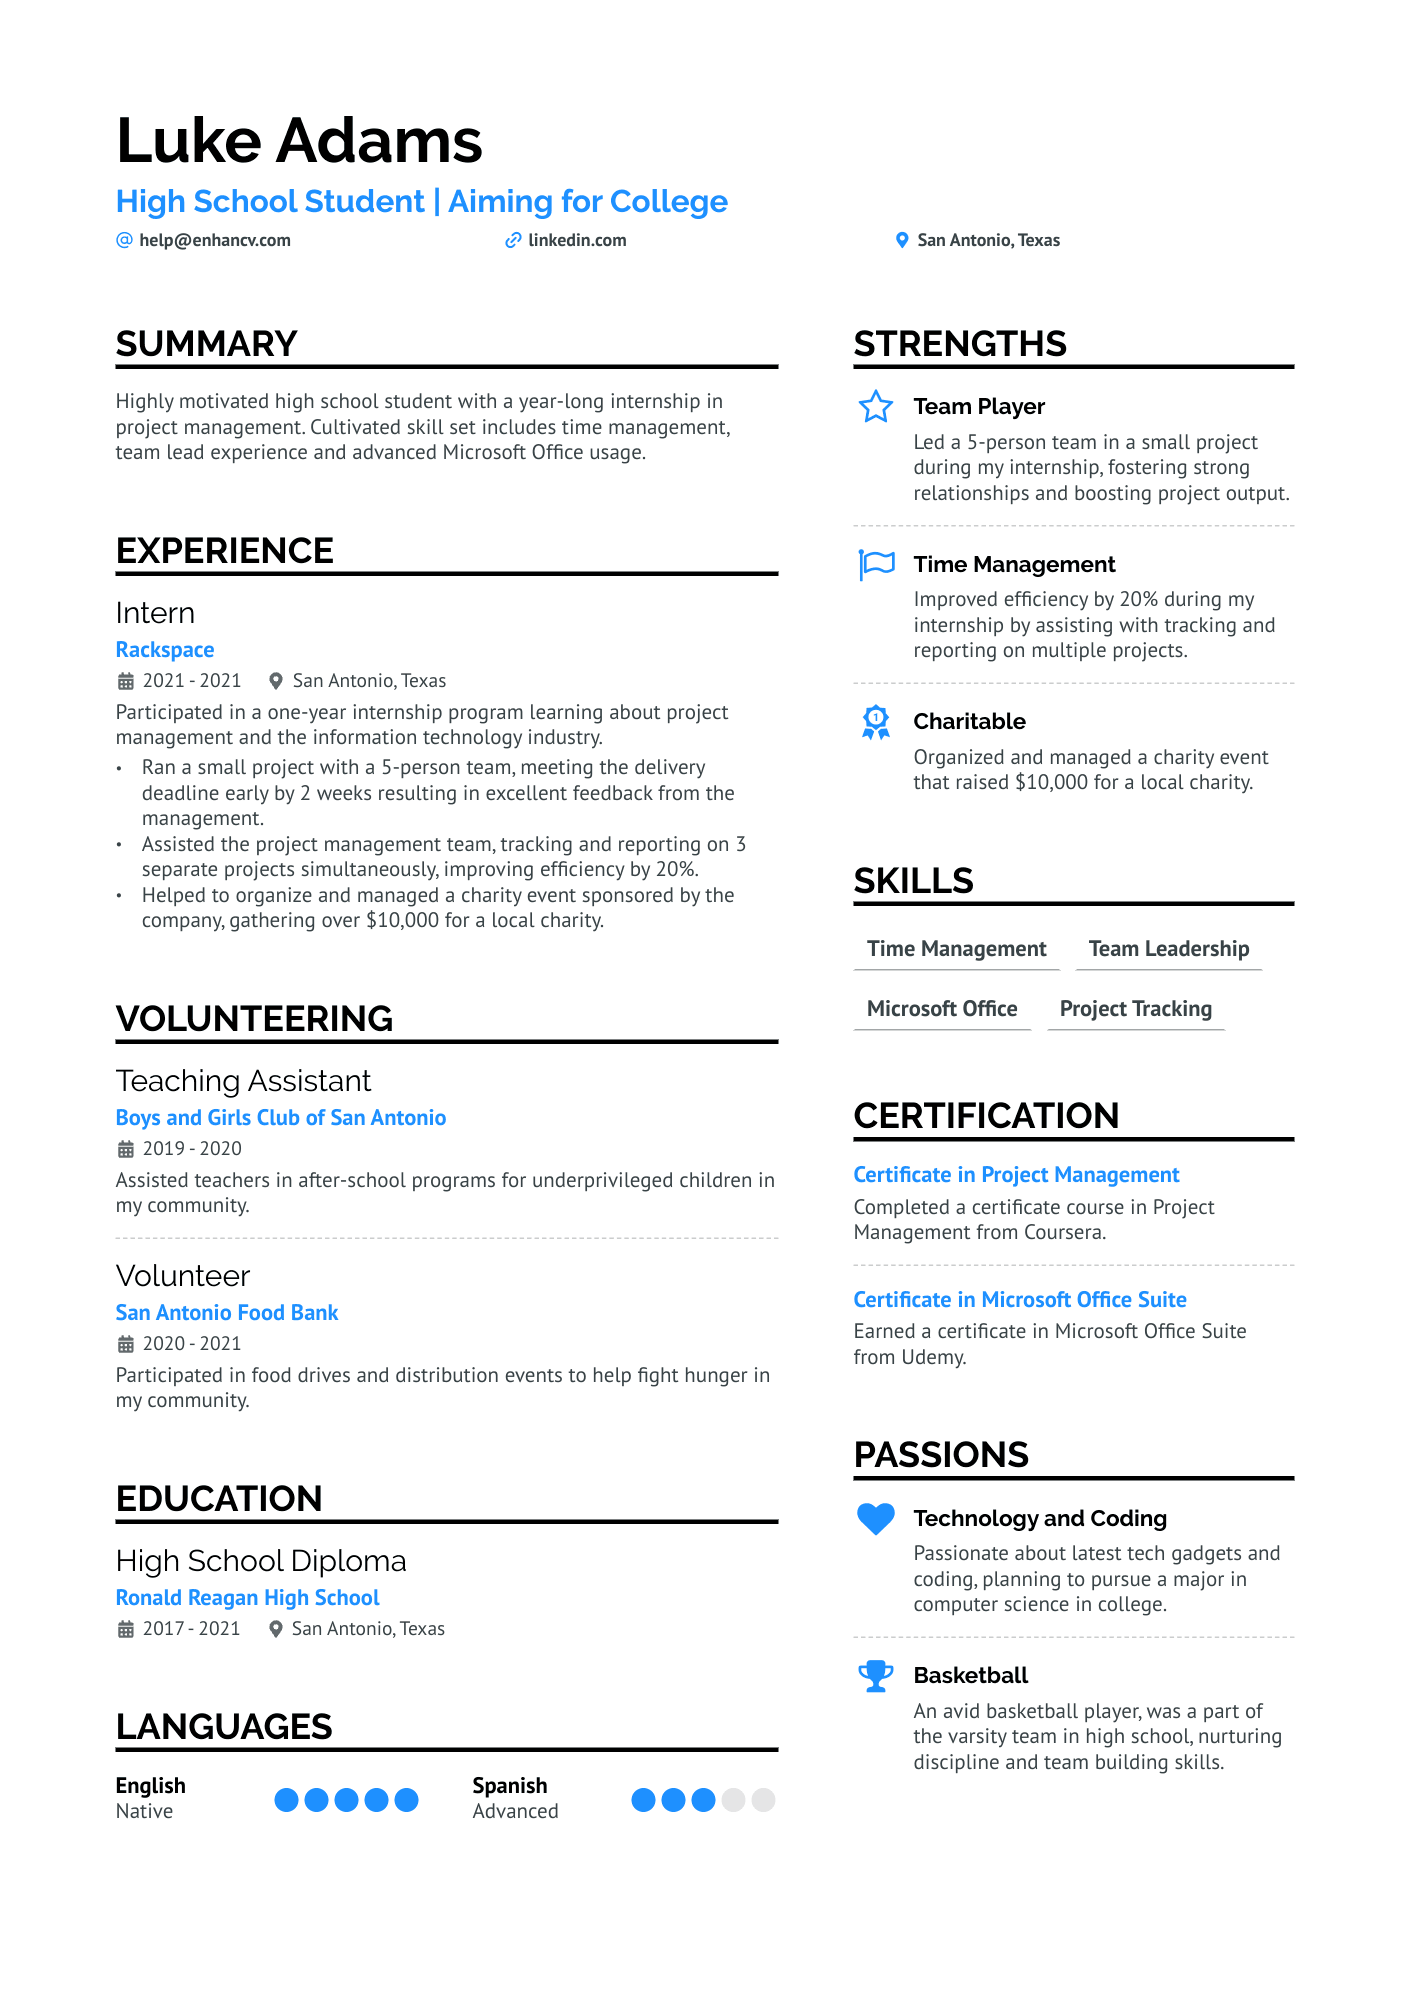 High School Student For College Resume Example